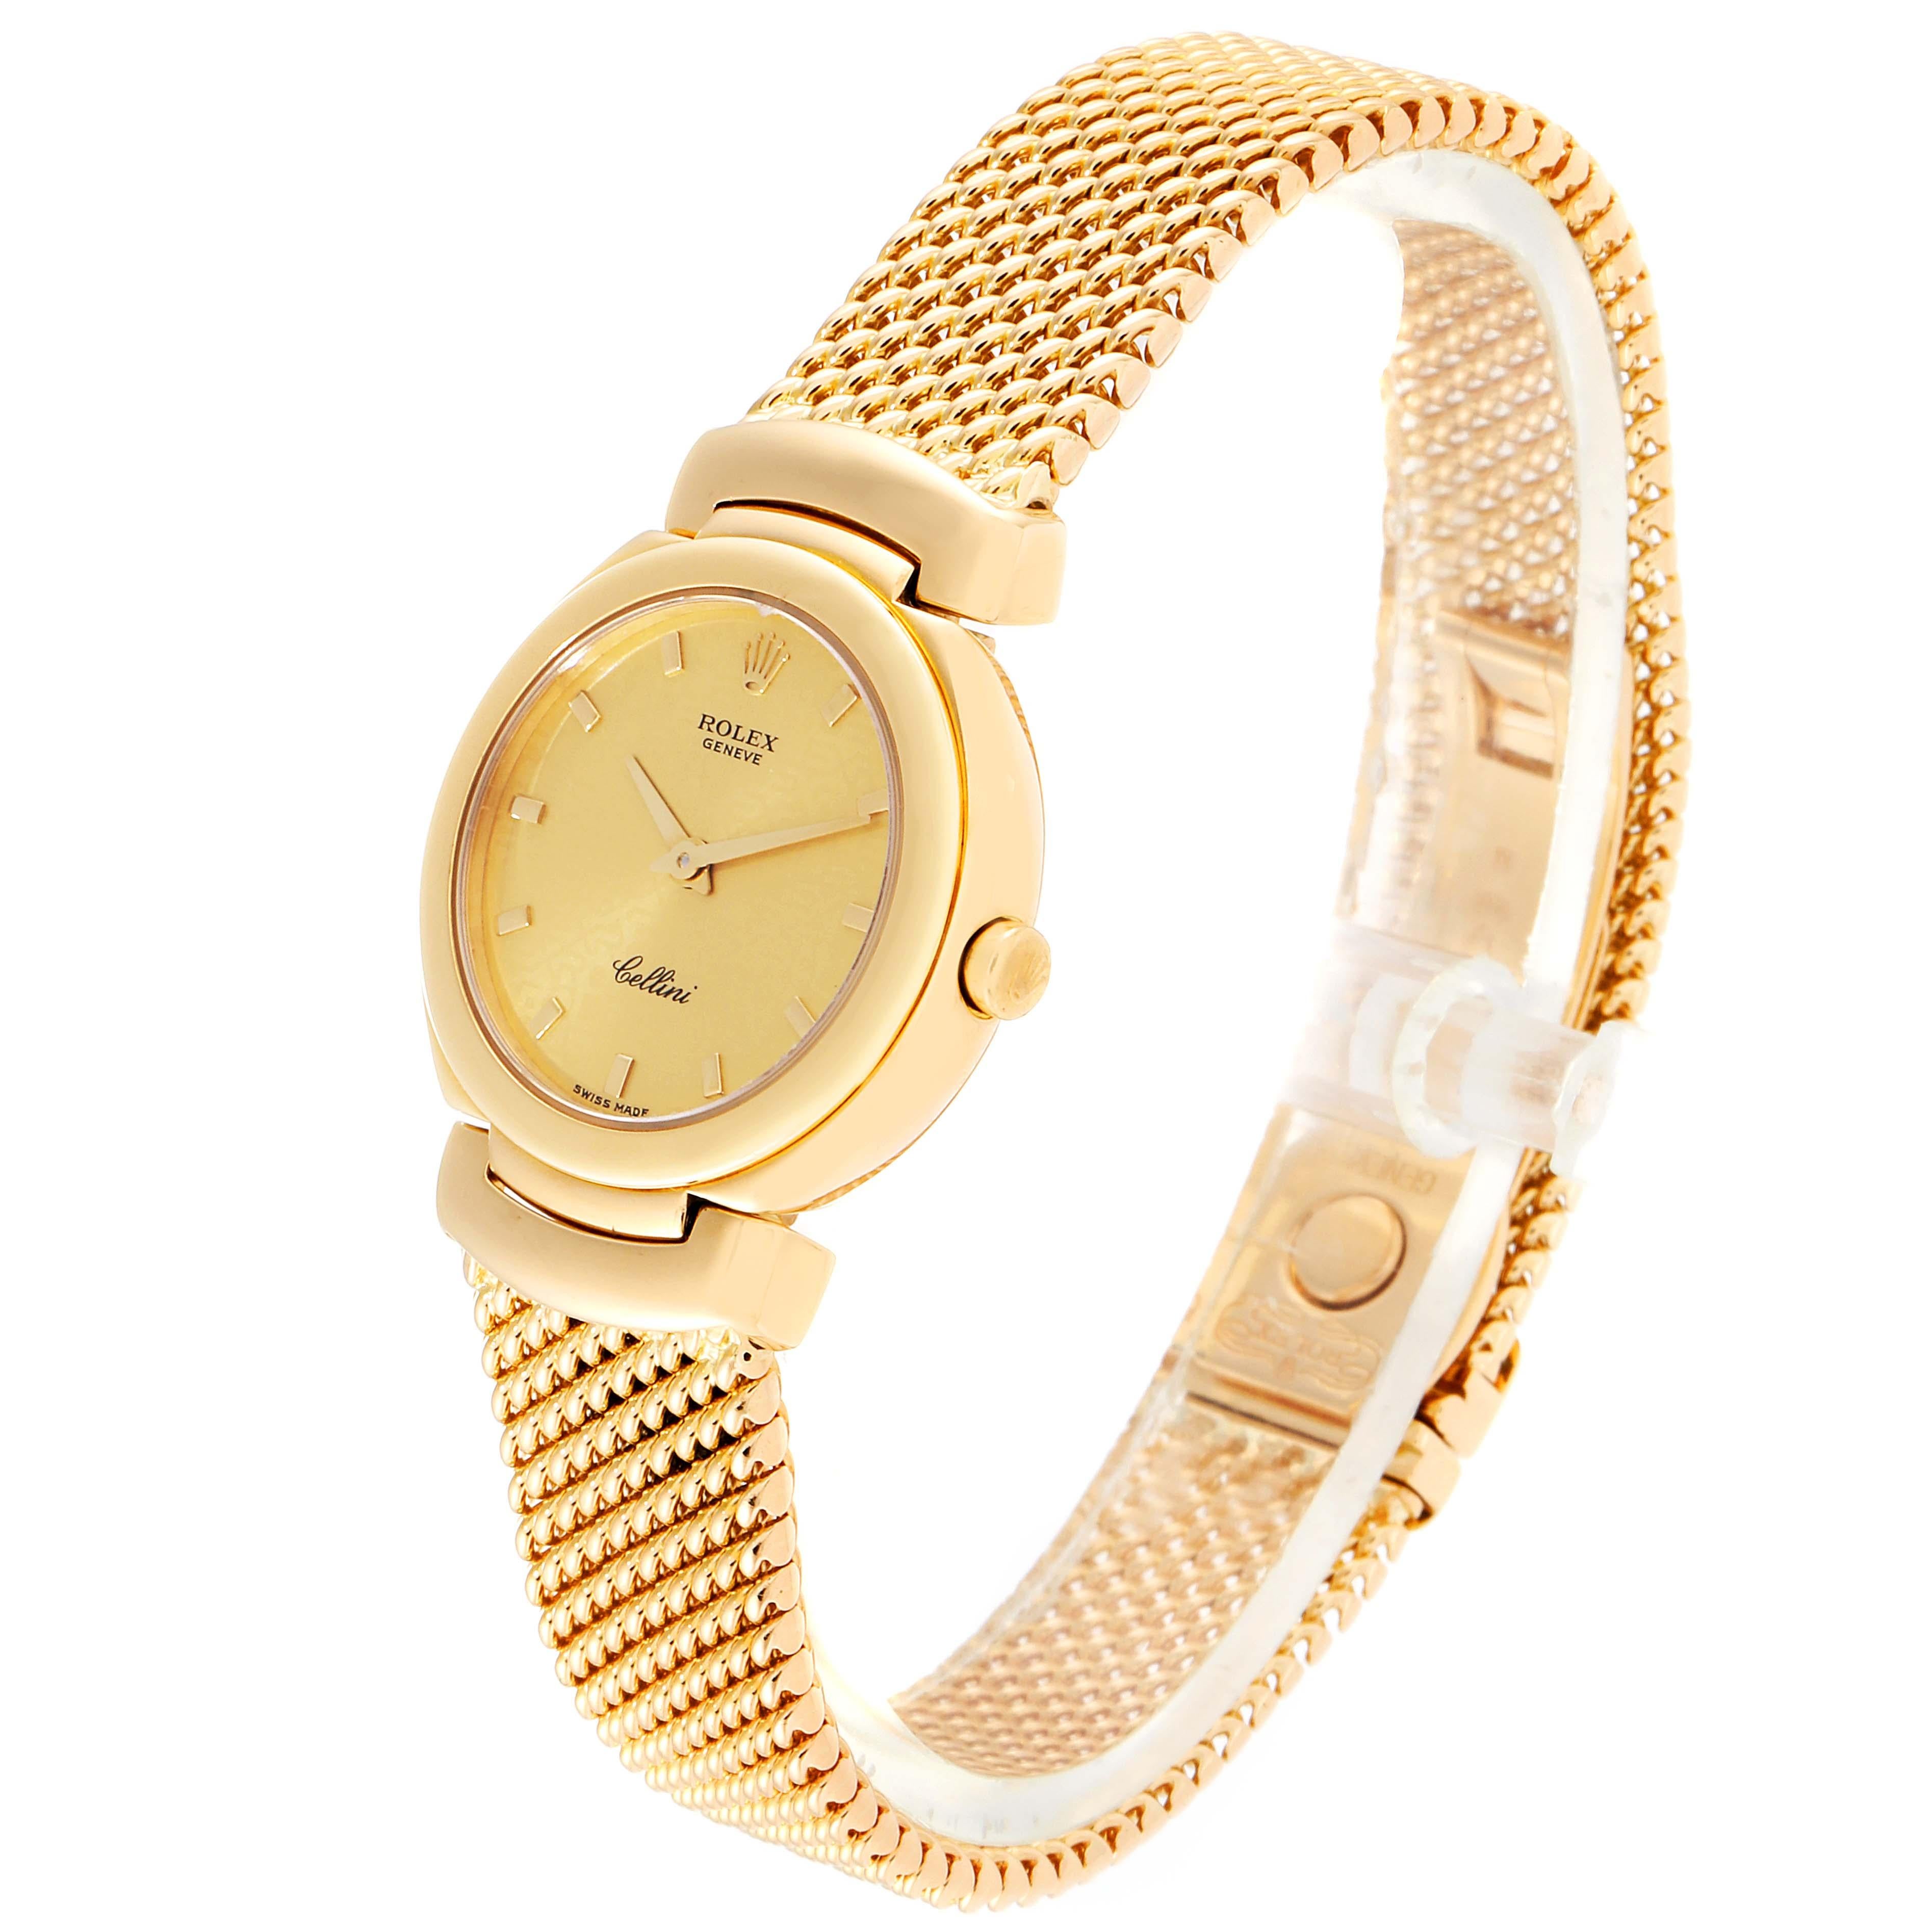 Rolex Cellini Yellow Gold Mesh Bracelet Ladies Watch 6621 Box Papers In Excellent Condition For Sale In Atlanta, GA